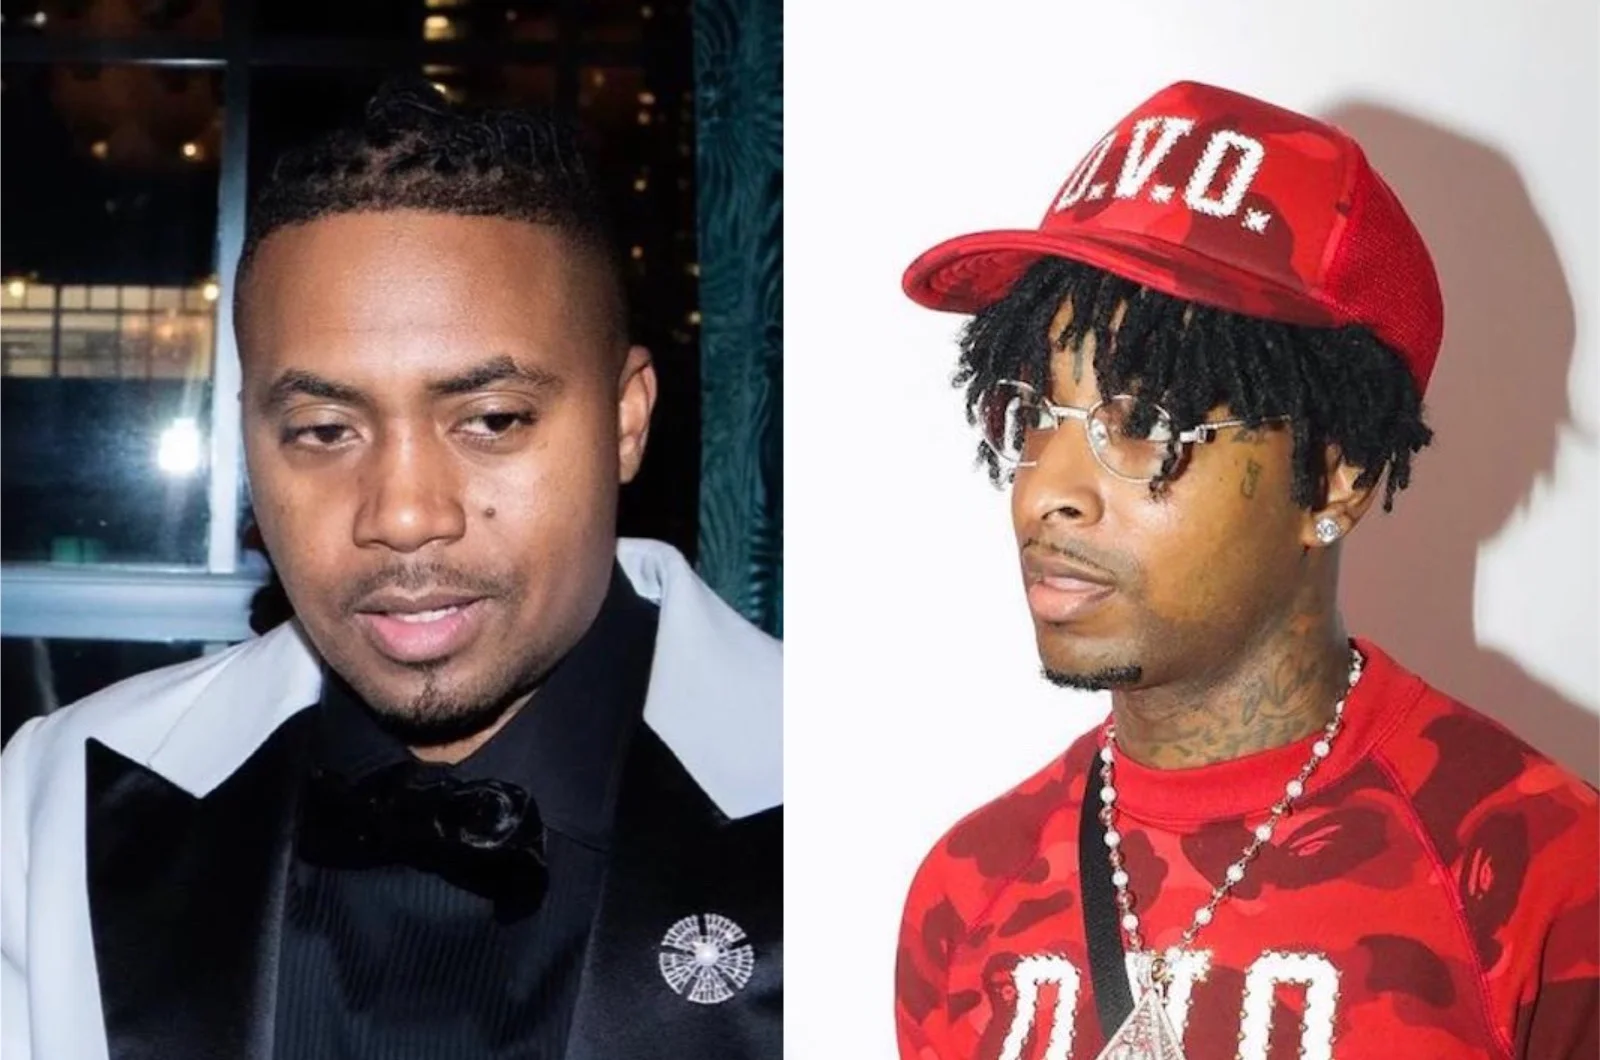 Nas Appears to Respond After 21 Savage Calls Him 'Not Relevant' - Rap-Up